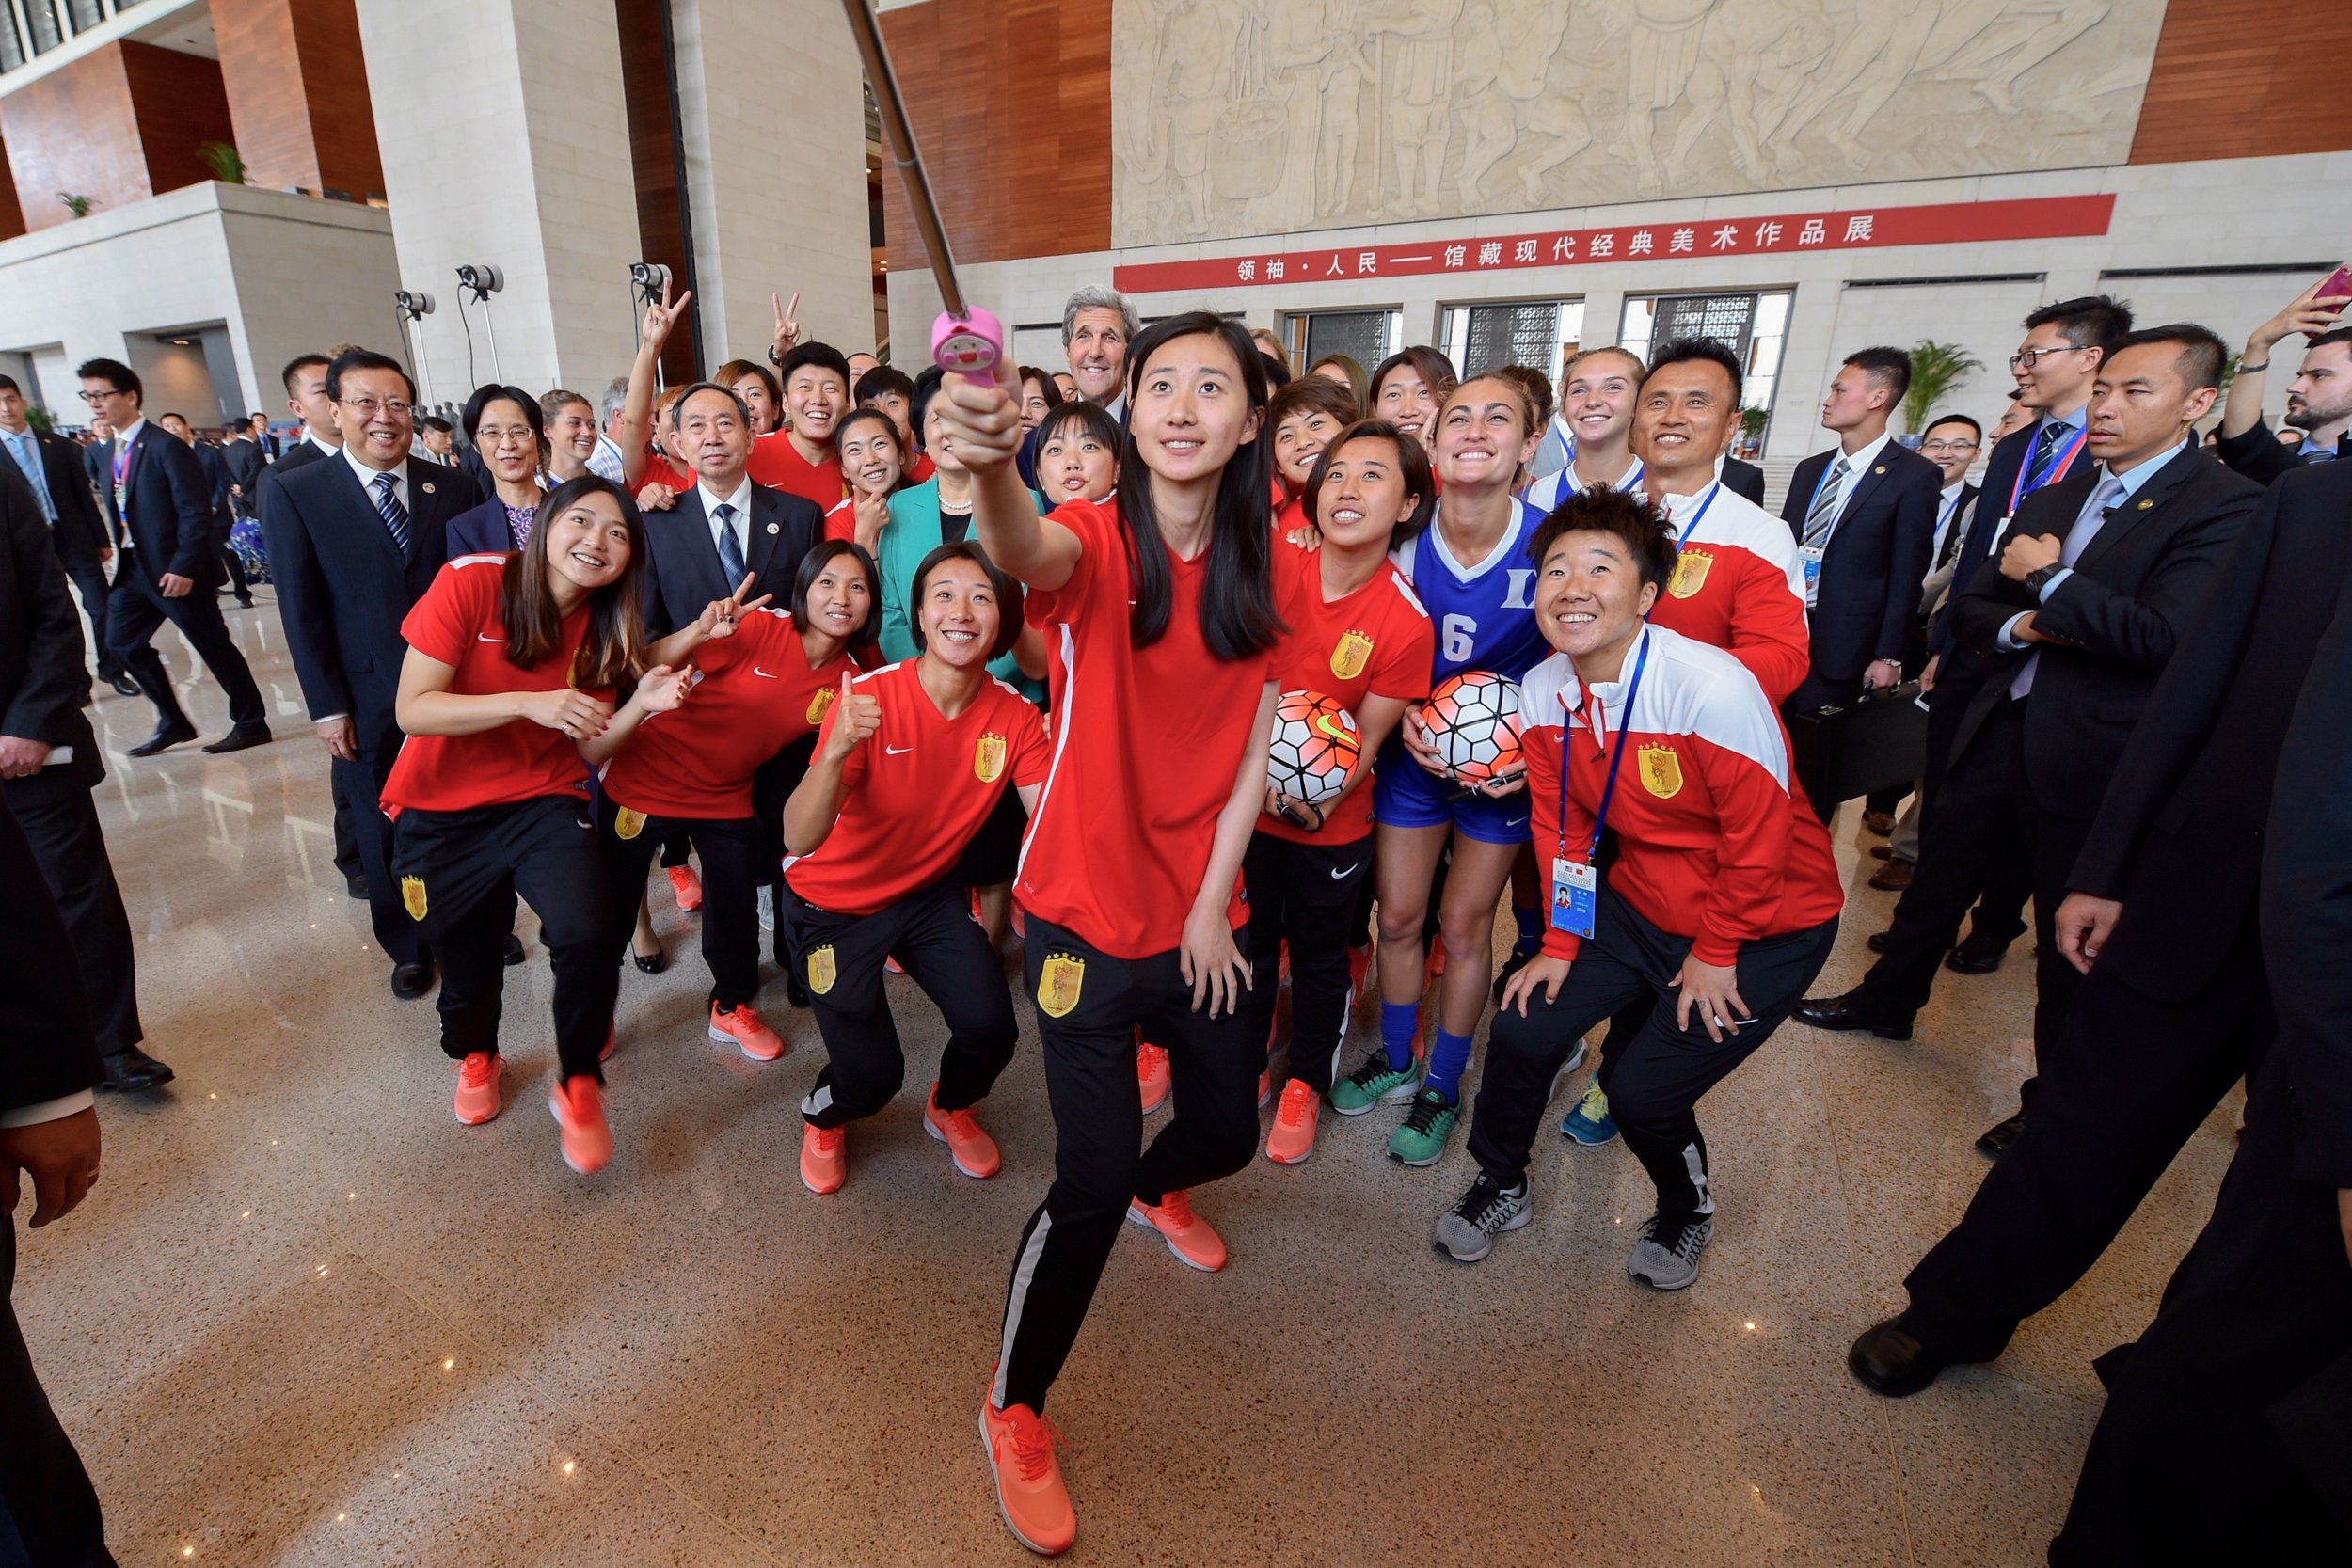  A photo with a Chinese soccer team during a visit to the National Museum on Tiananmen Square. 